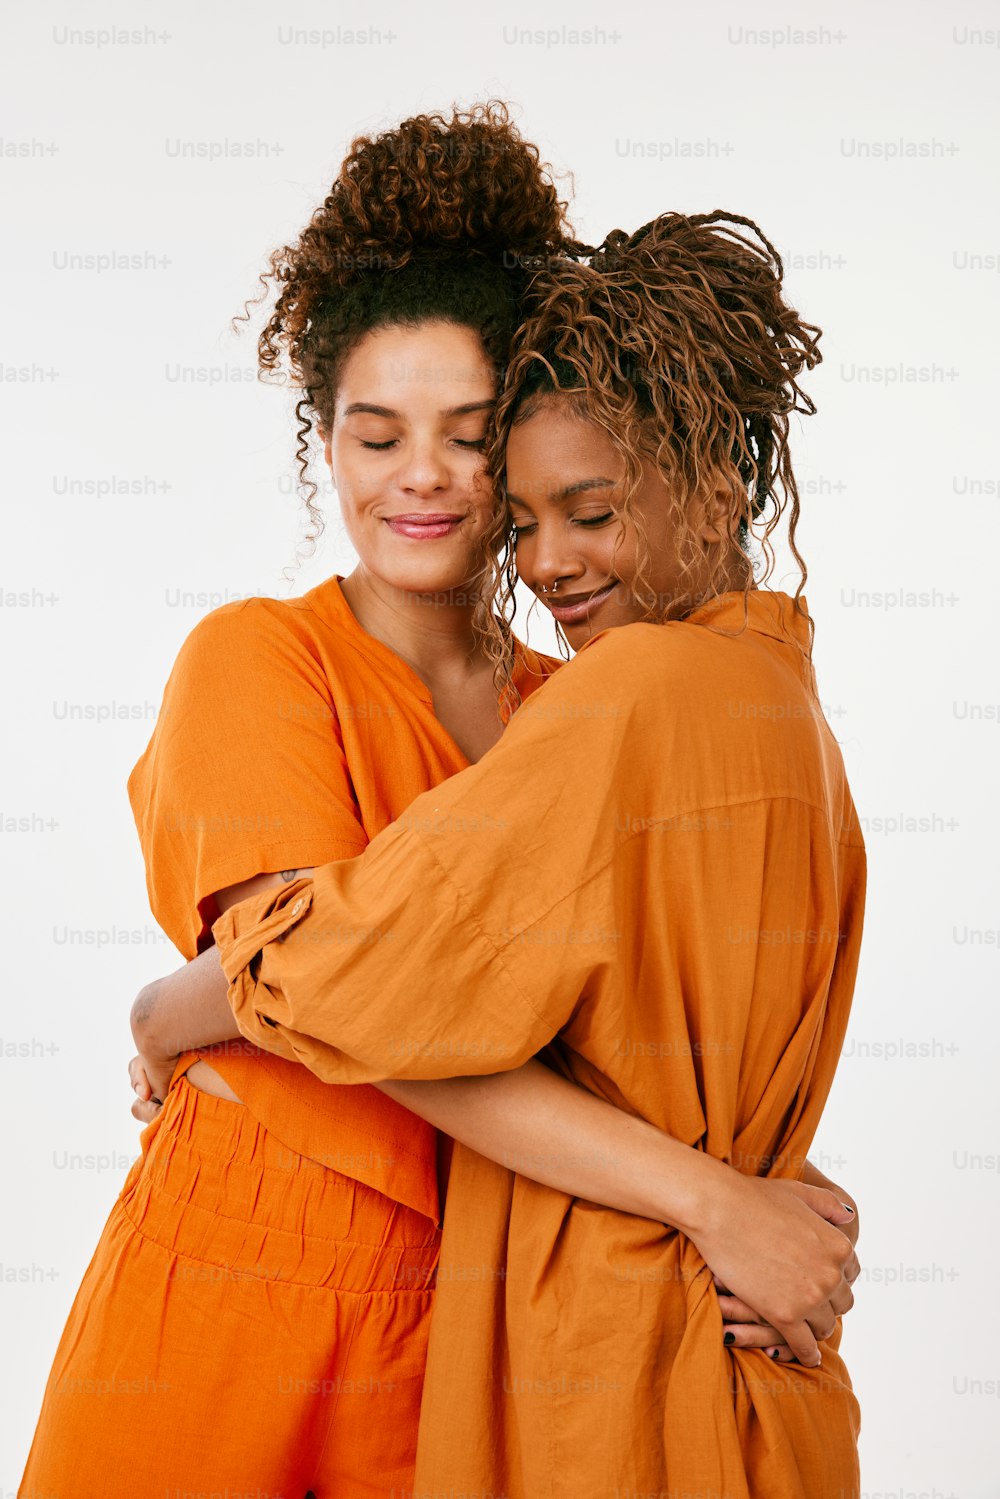 two women hugging each other in orange outfits